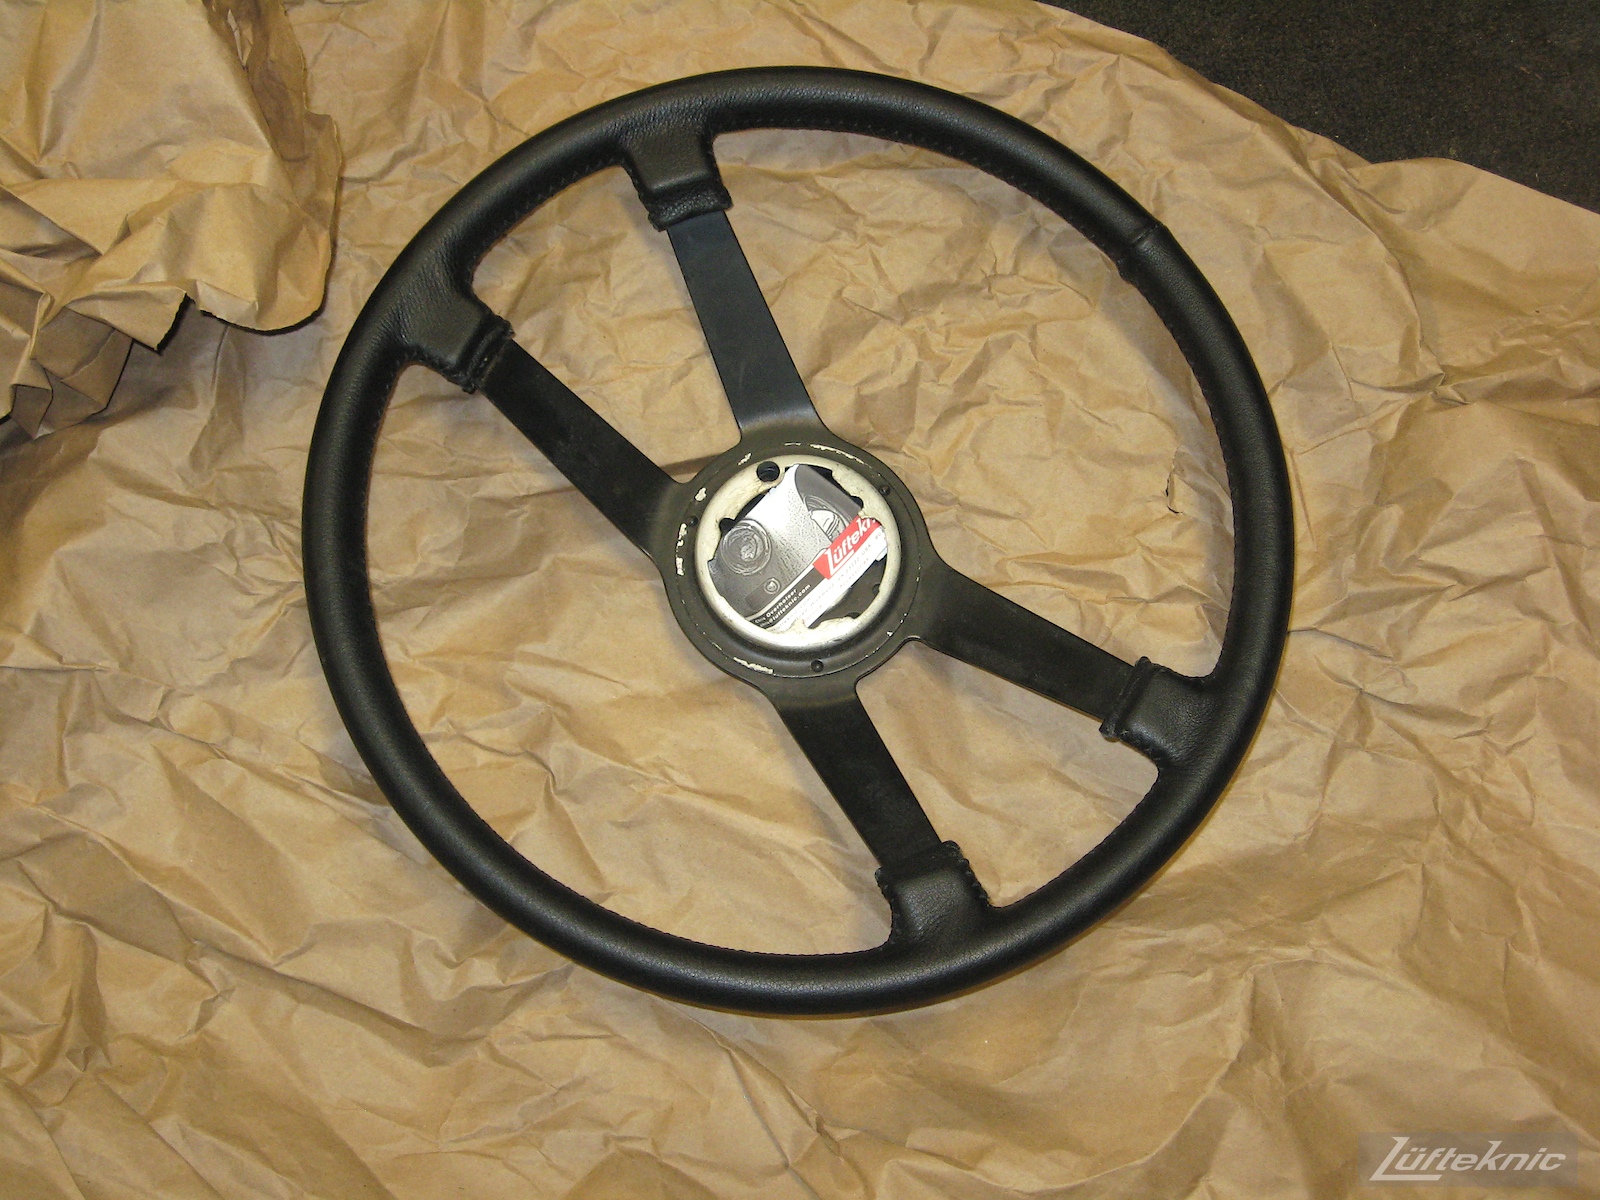 Refinished steering wheel for a 914 sitting on packing paper.